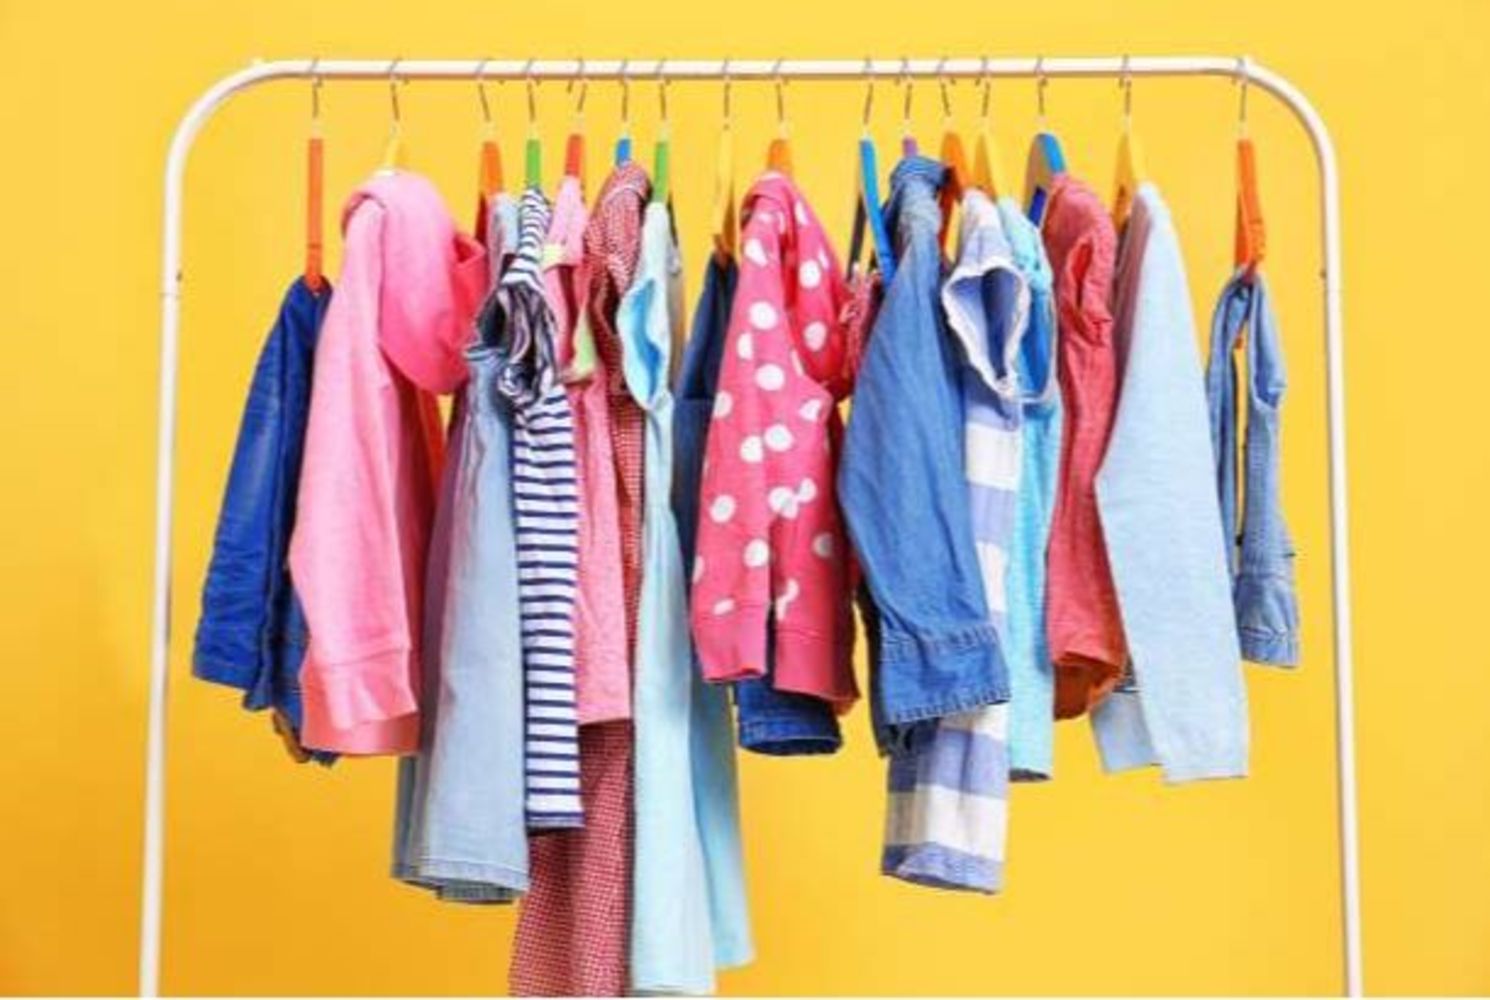 Textile and Clothing Auction to include Branded Footwear, La Redoute Fashion, Bedding, Curtains, Room Ensembles, Duvet Sets, Towel Bales, Bath Mats...